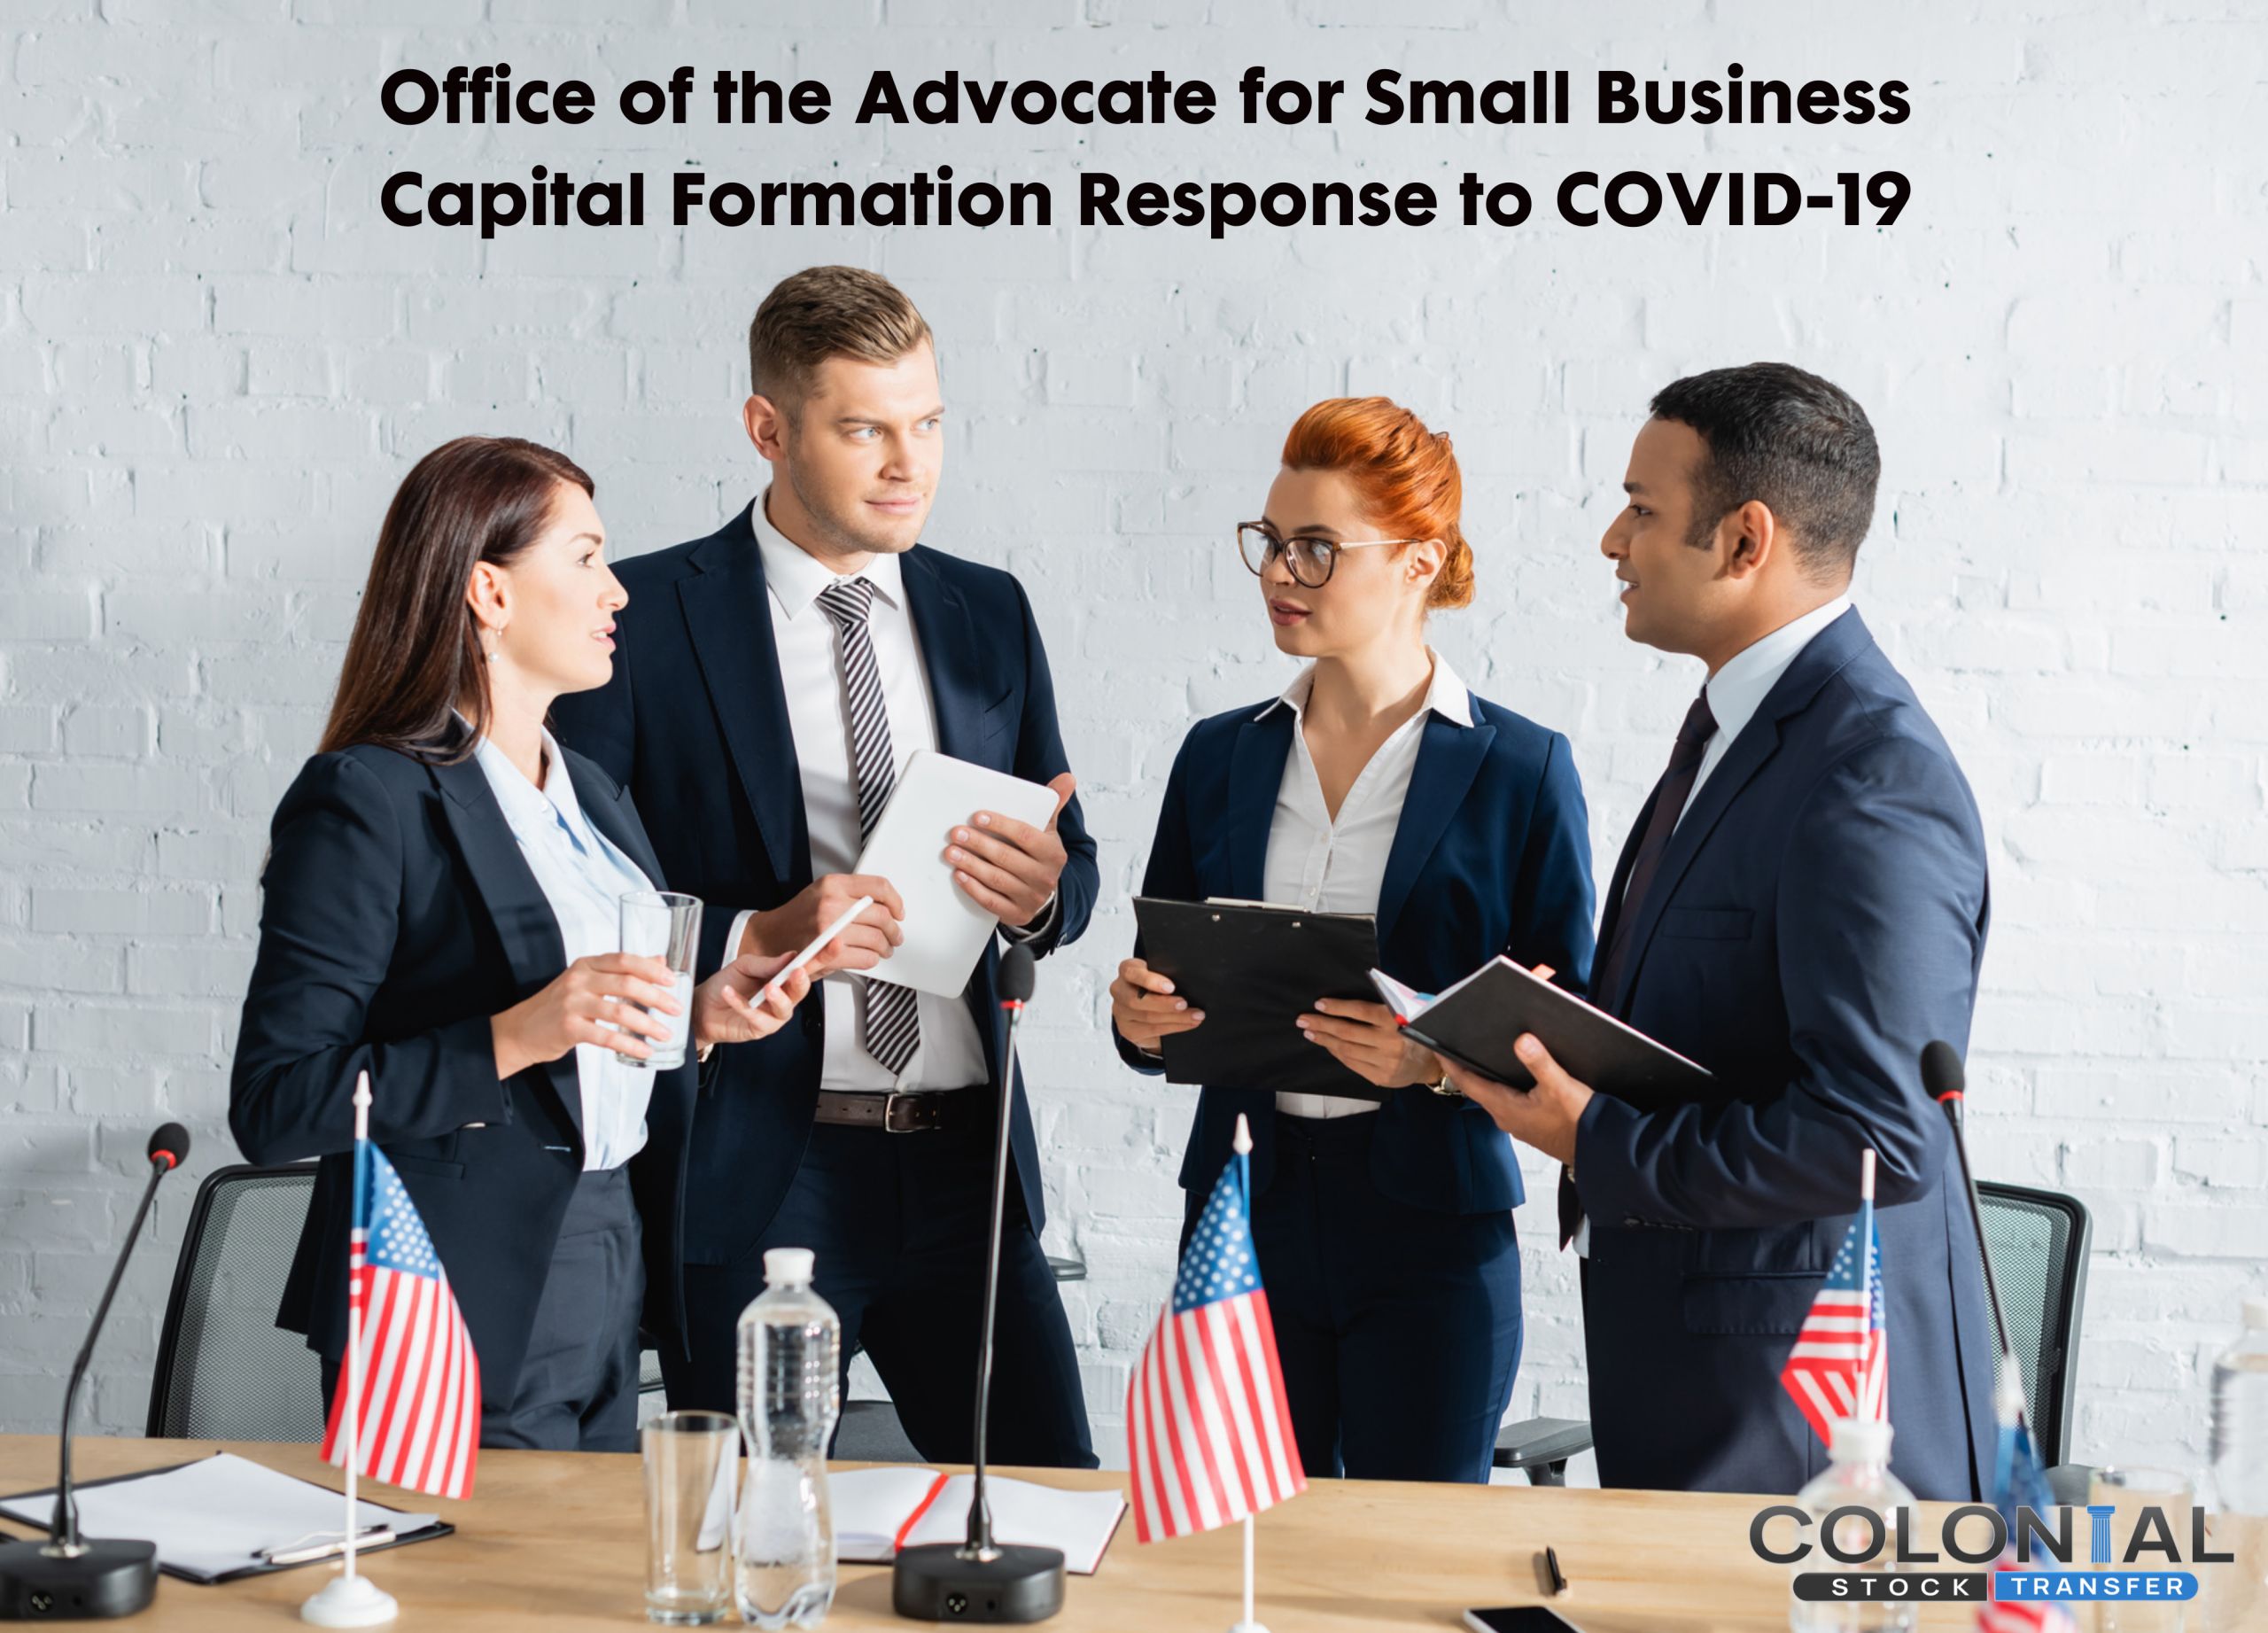 Office of the Advocate for Small Business Capital Formation Response to COVID-19